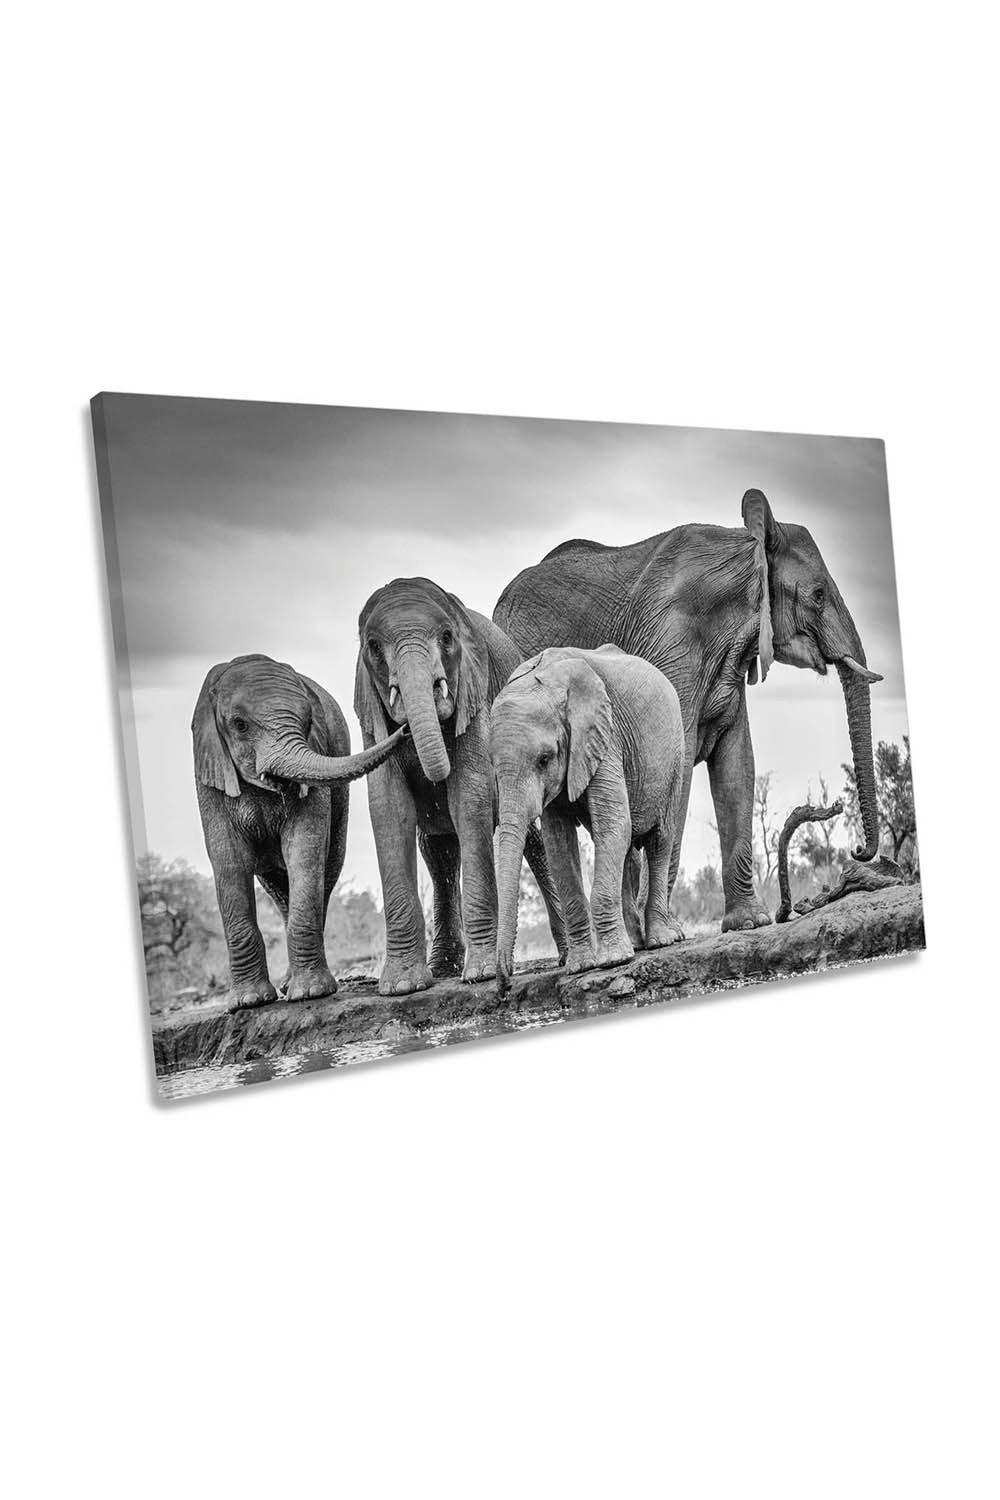 A Giant Unity Elephant Family Canvas Wall Art Picture Print